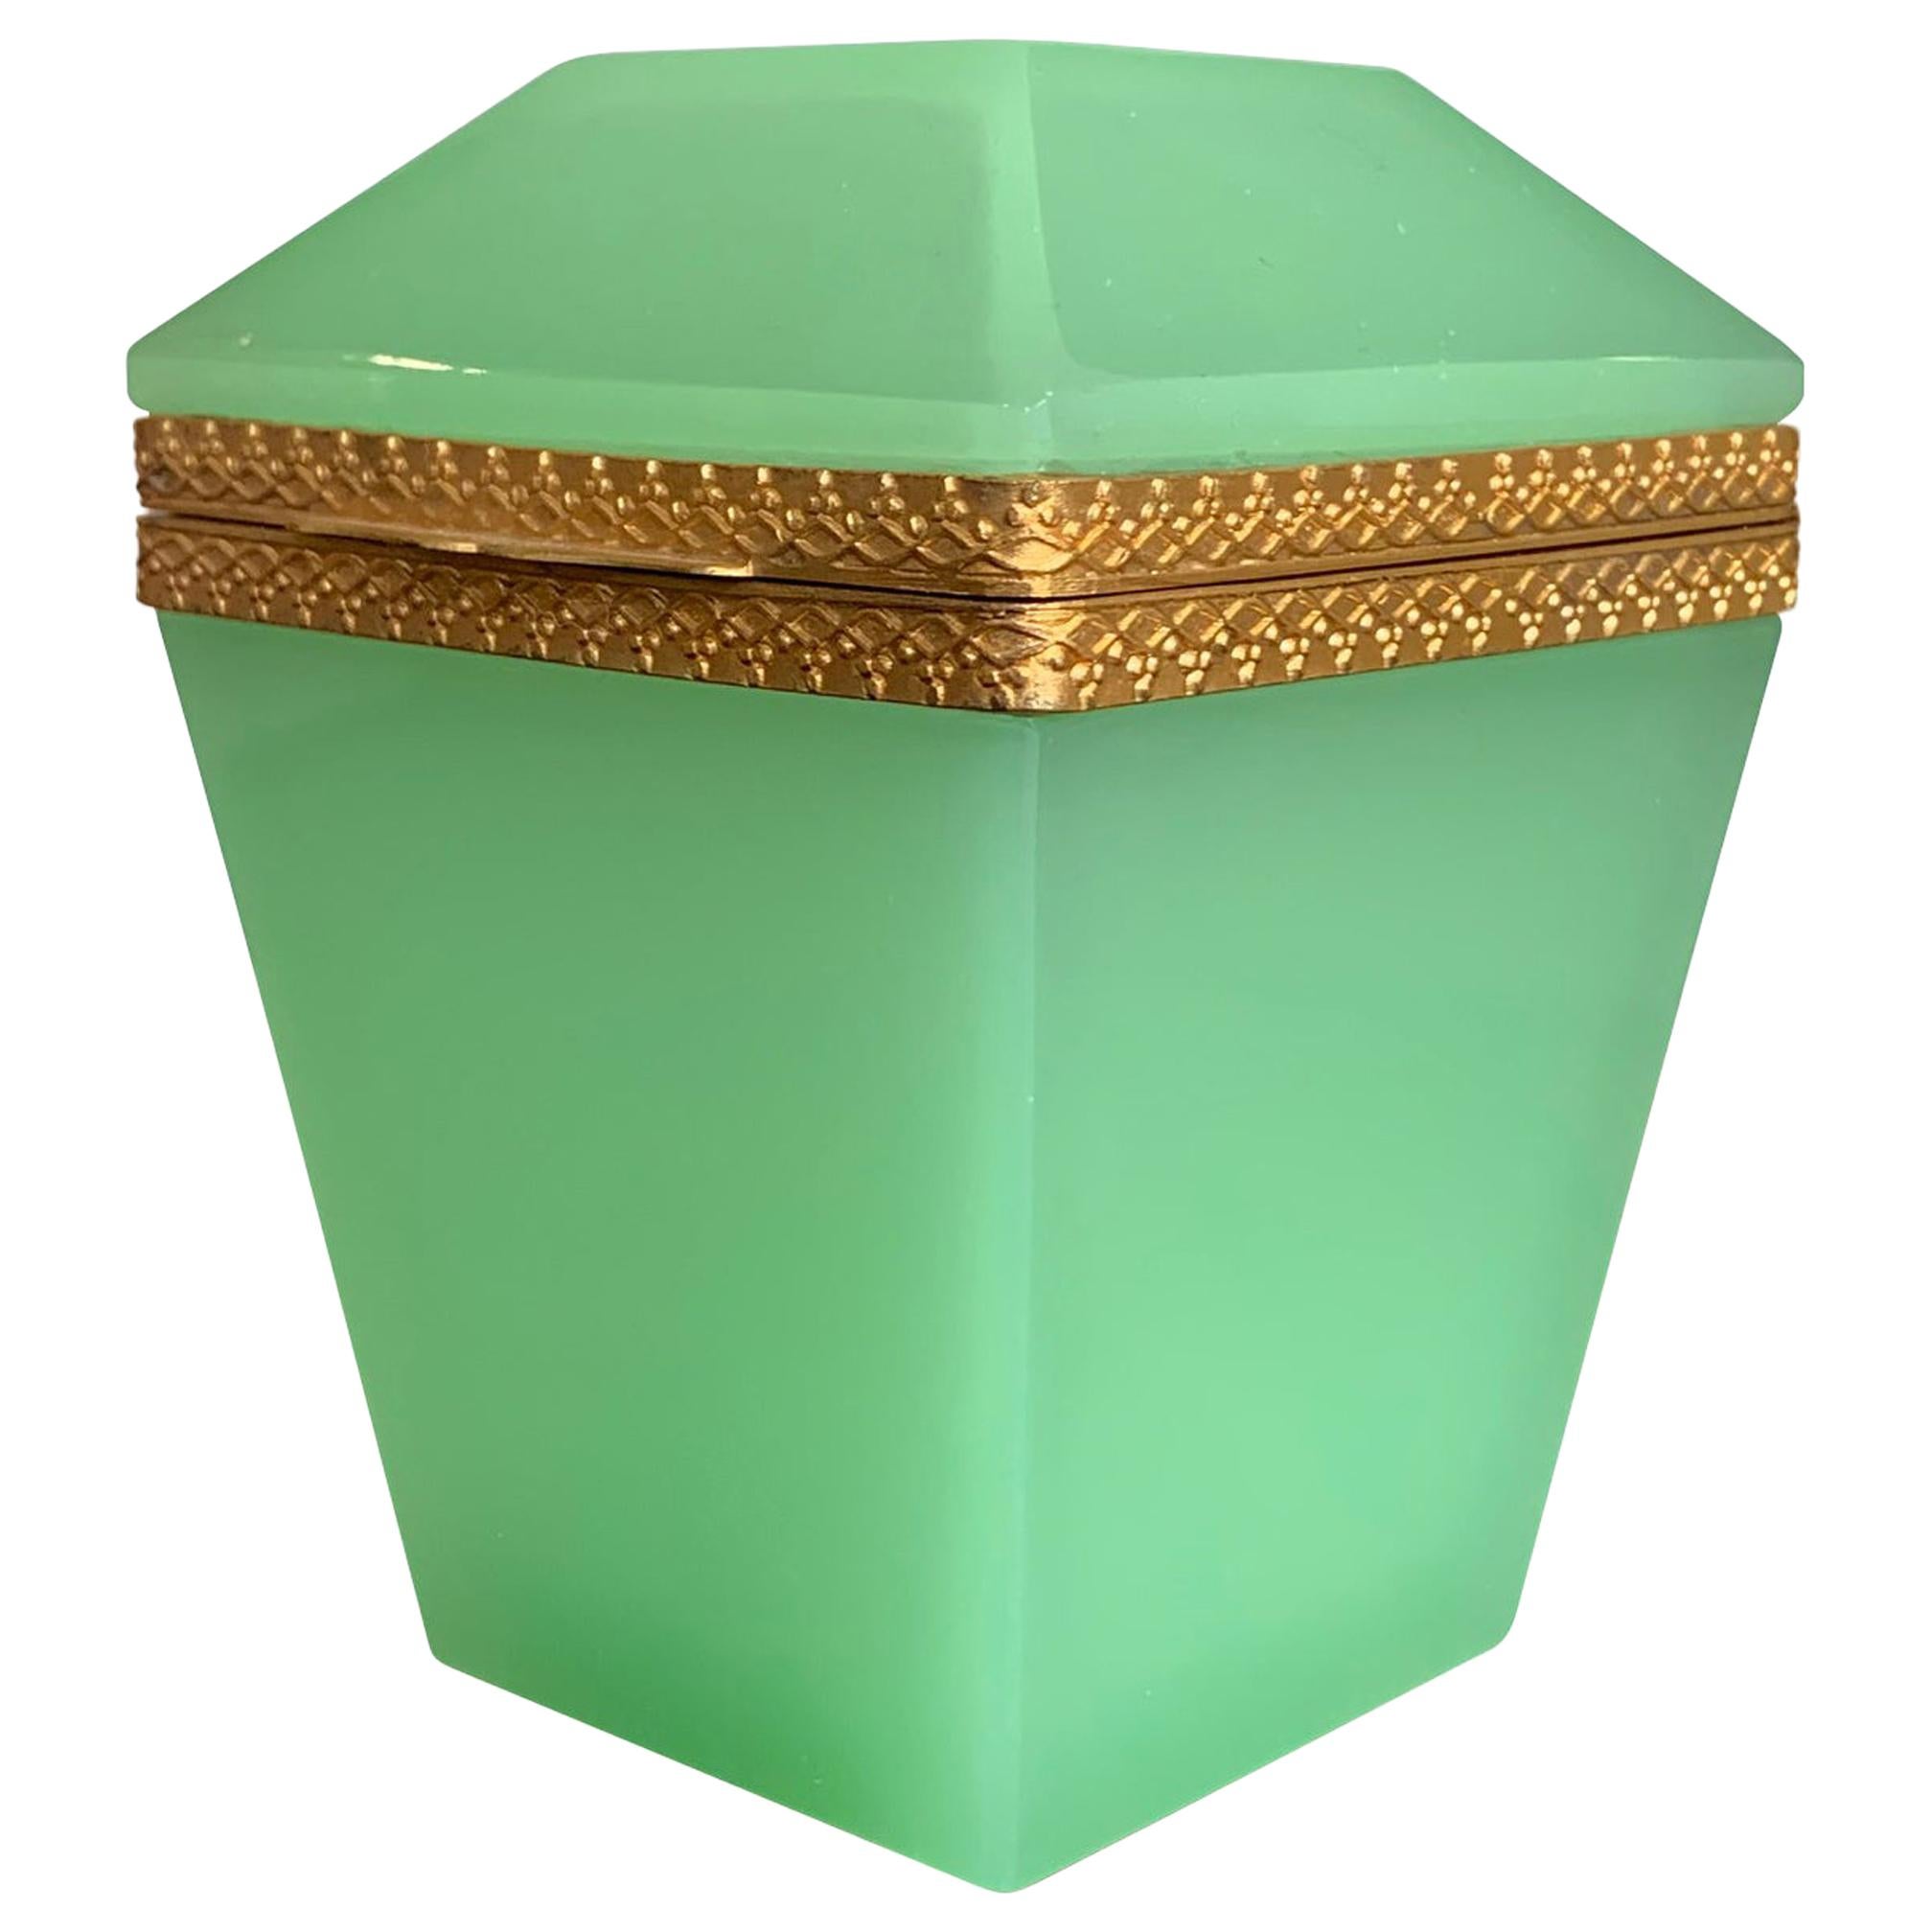 1950s Lime Green Murano Glass Hinged Box with Facetted Lid and Silvered Edging